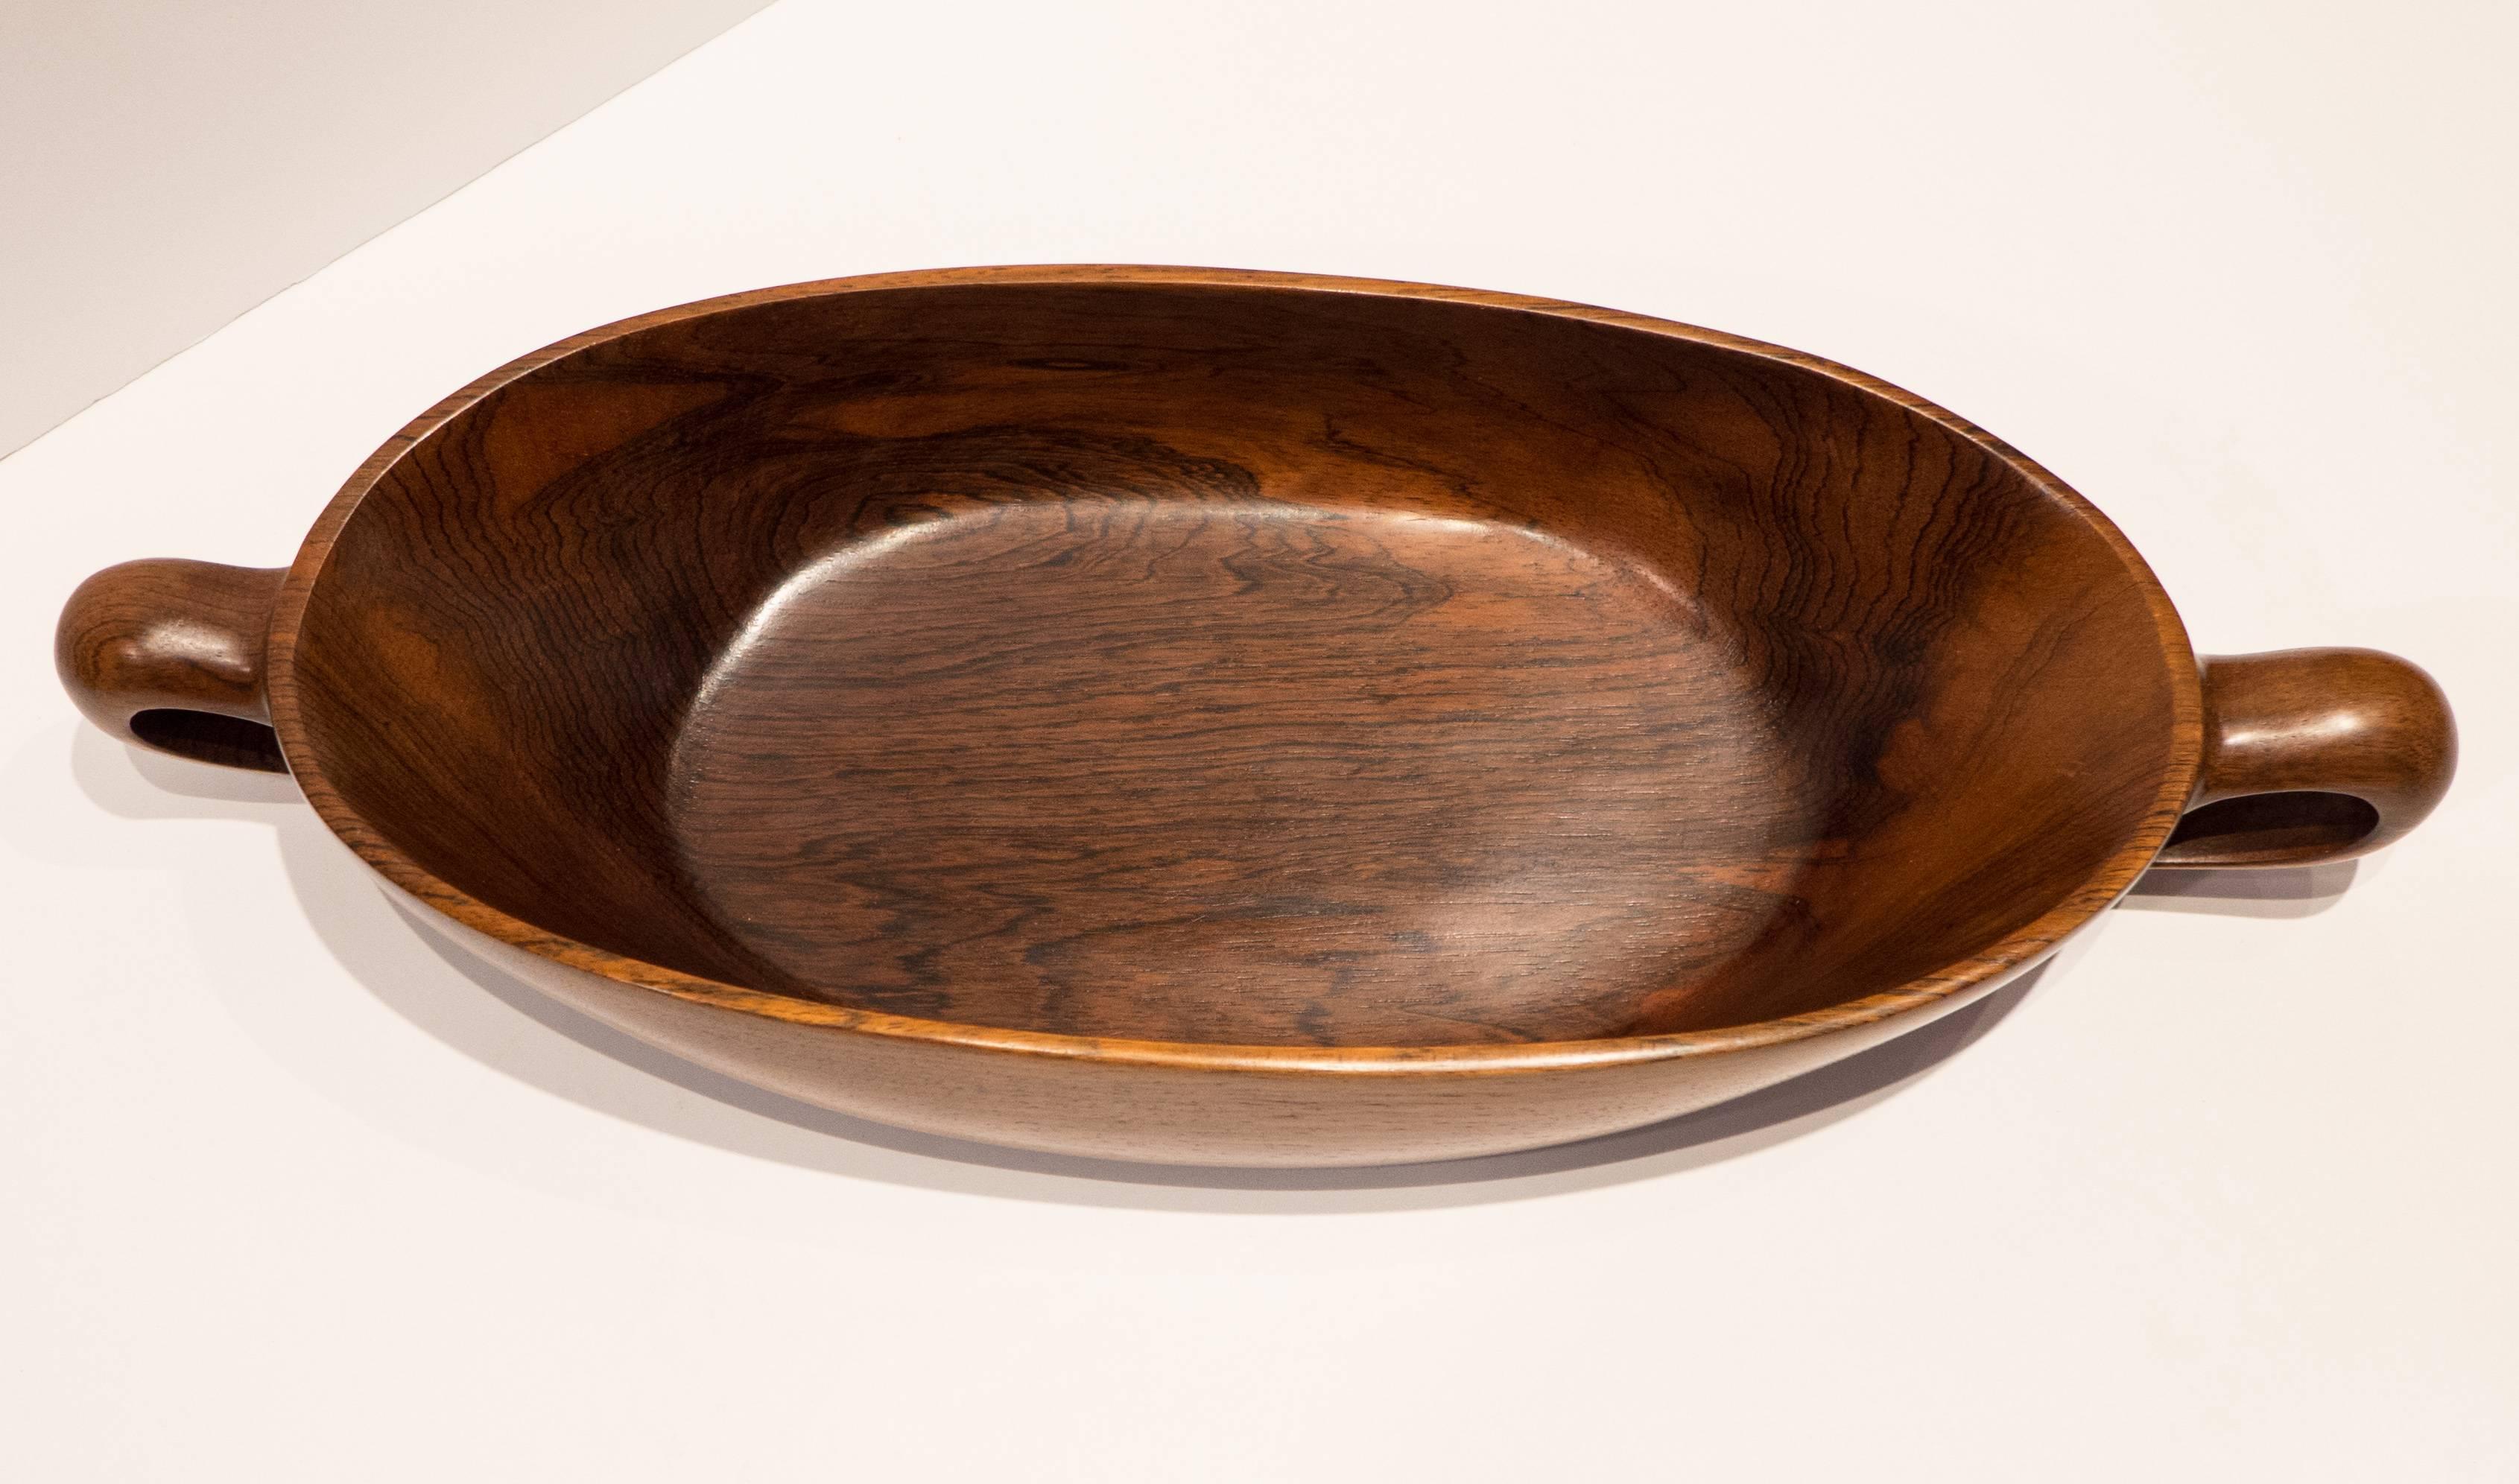 Oval bowl with handles, hand-carved from a solid piece of beautifully figured Jacaranda wood. By Romanian-born Brazilian designer Jean Gillon, produced by his company, Italma Wood Art, circa 1960s. A rare Gillon accessory. Retains original paper